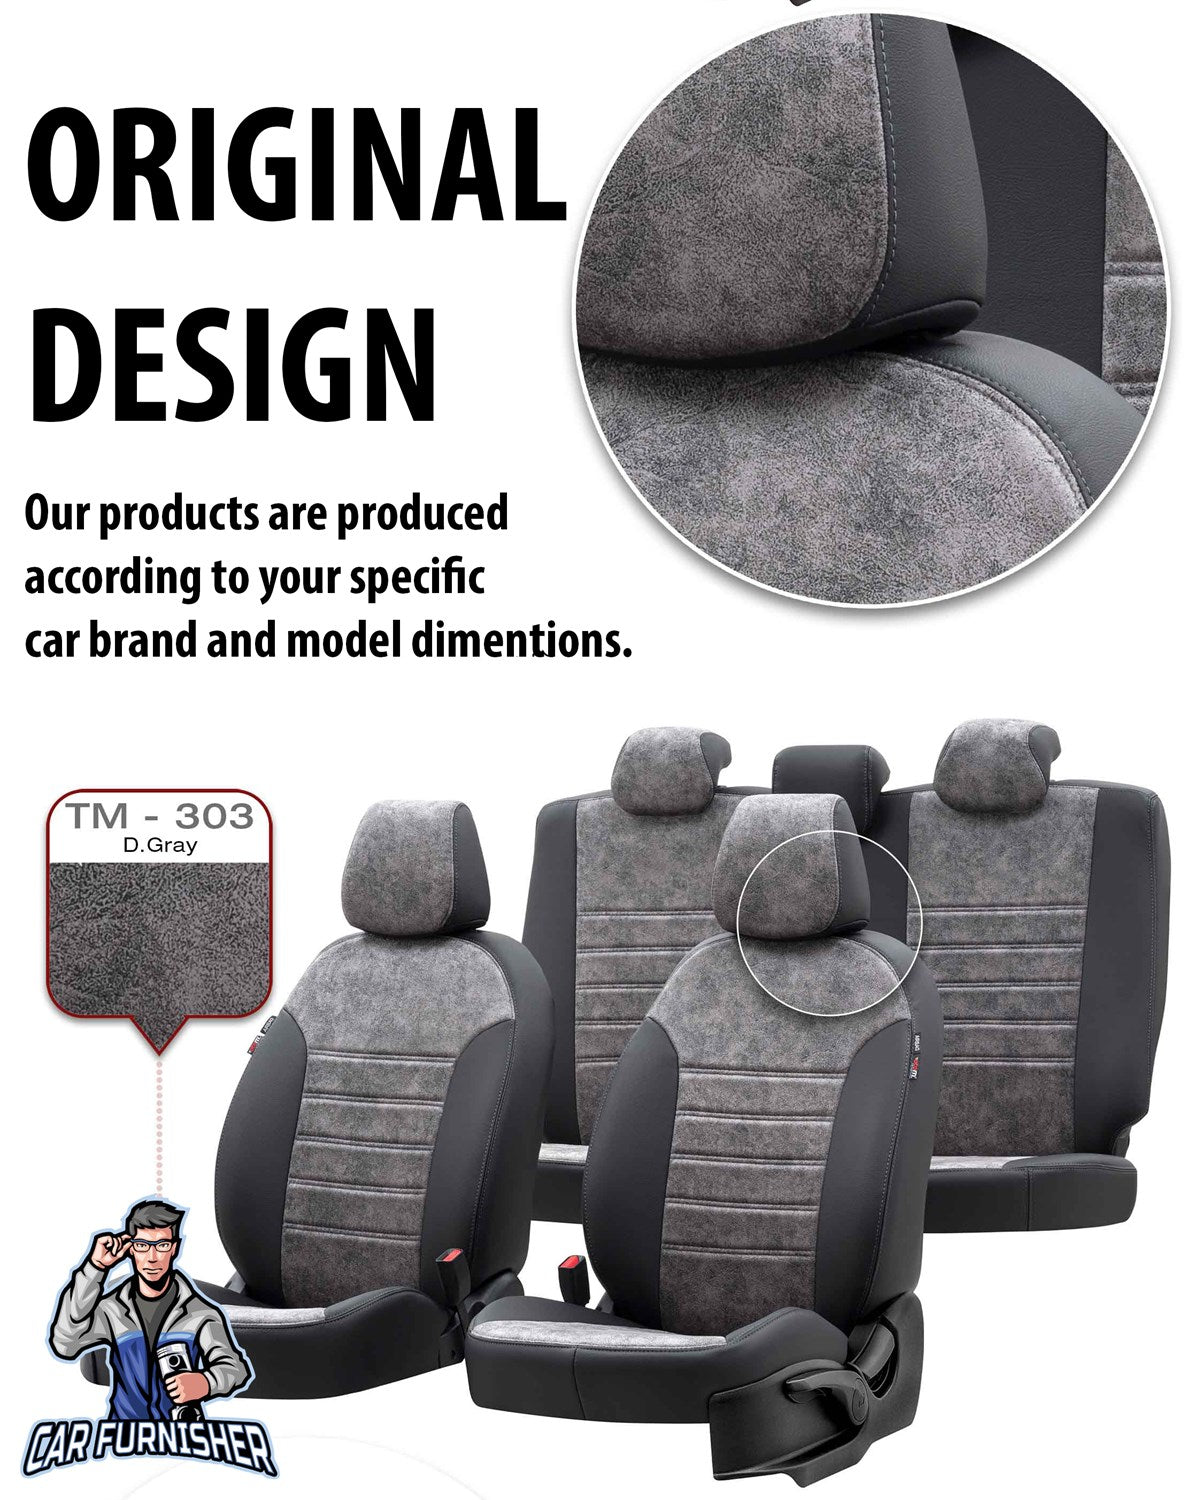 Renault Scenic Seat Covers Milano Suede Design Burgundy Leather & Suede Fabric